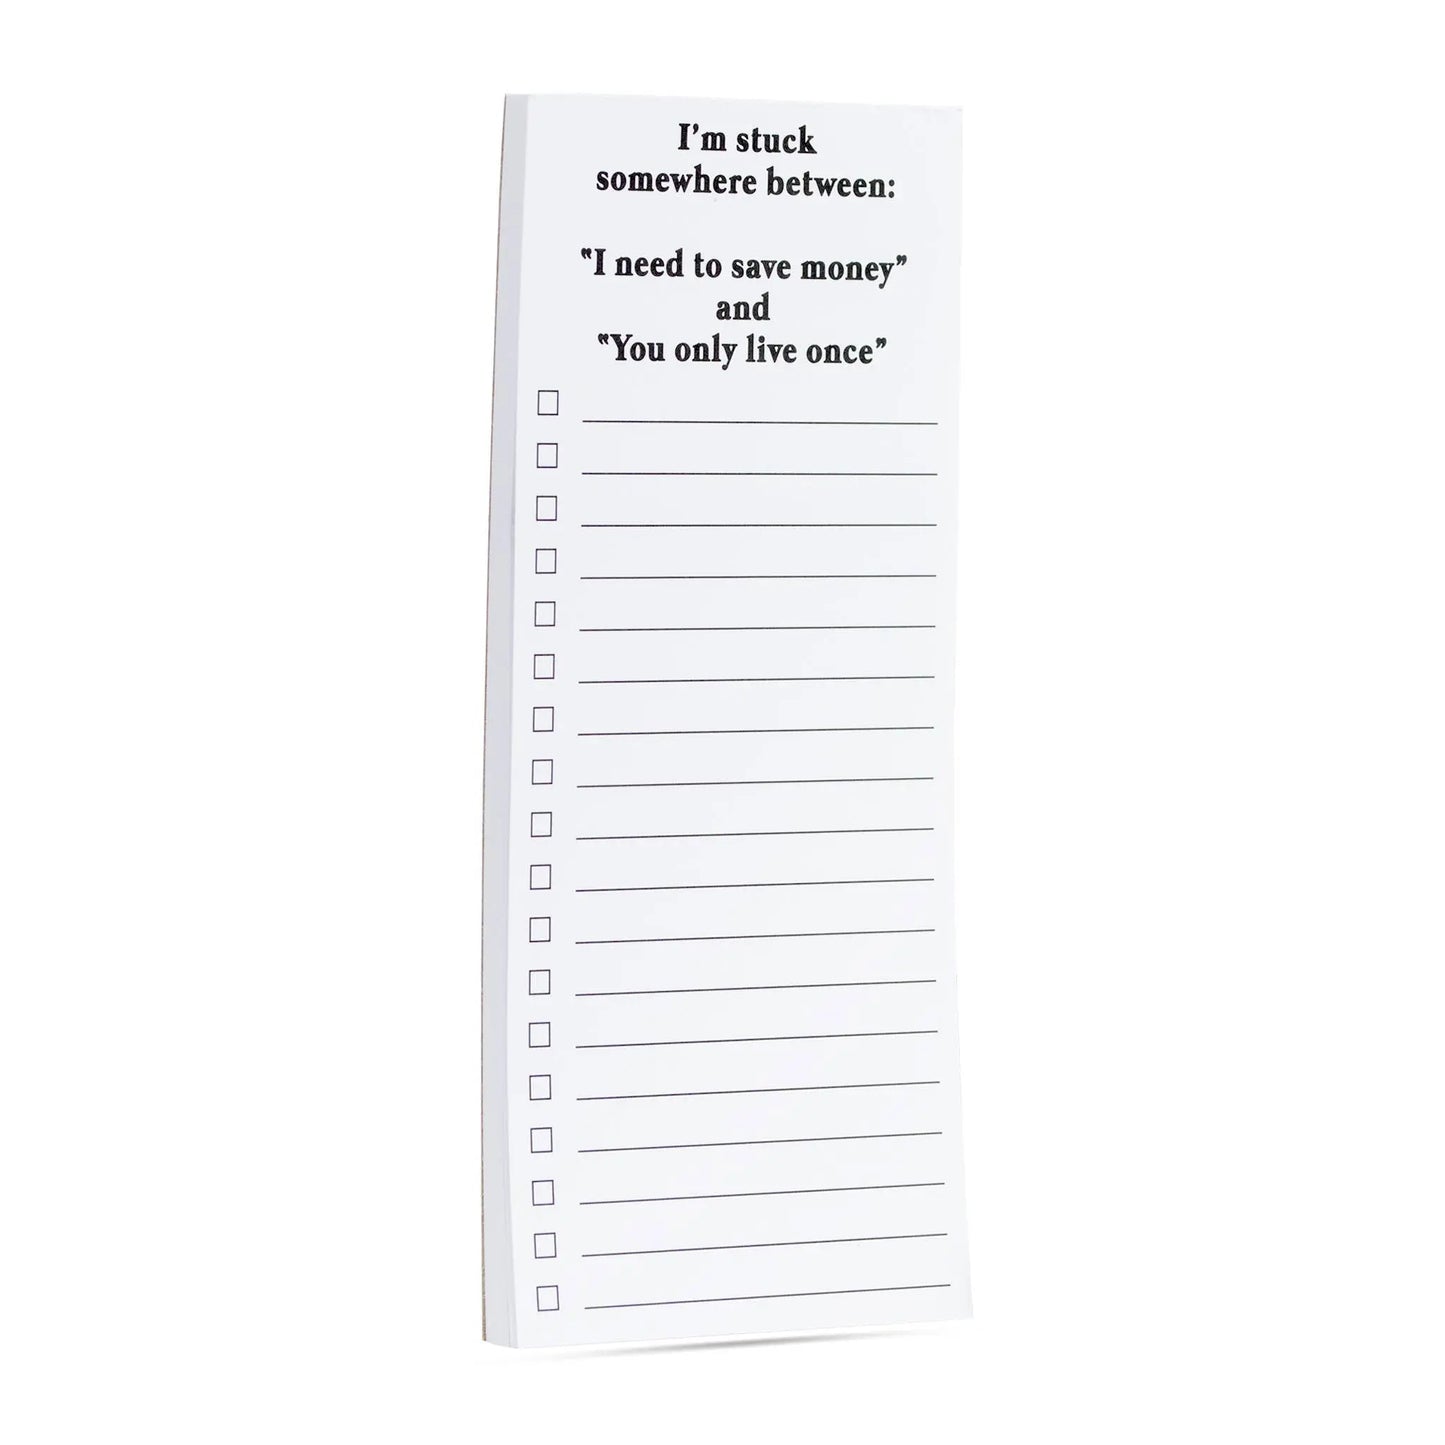 Stuck somewhere between save money & YOLO funny list pad ellembee gift